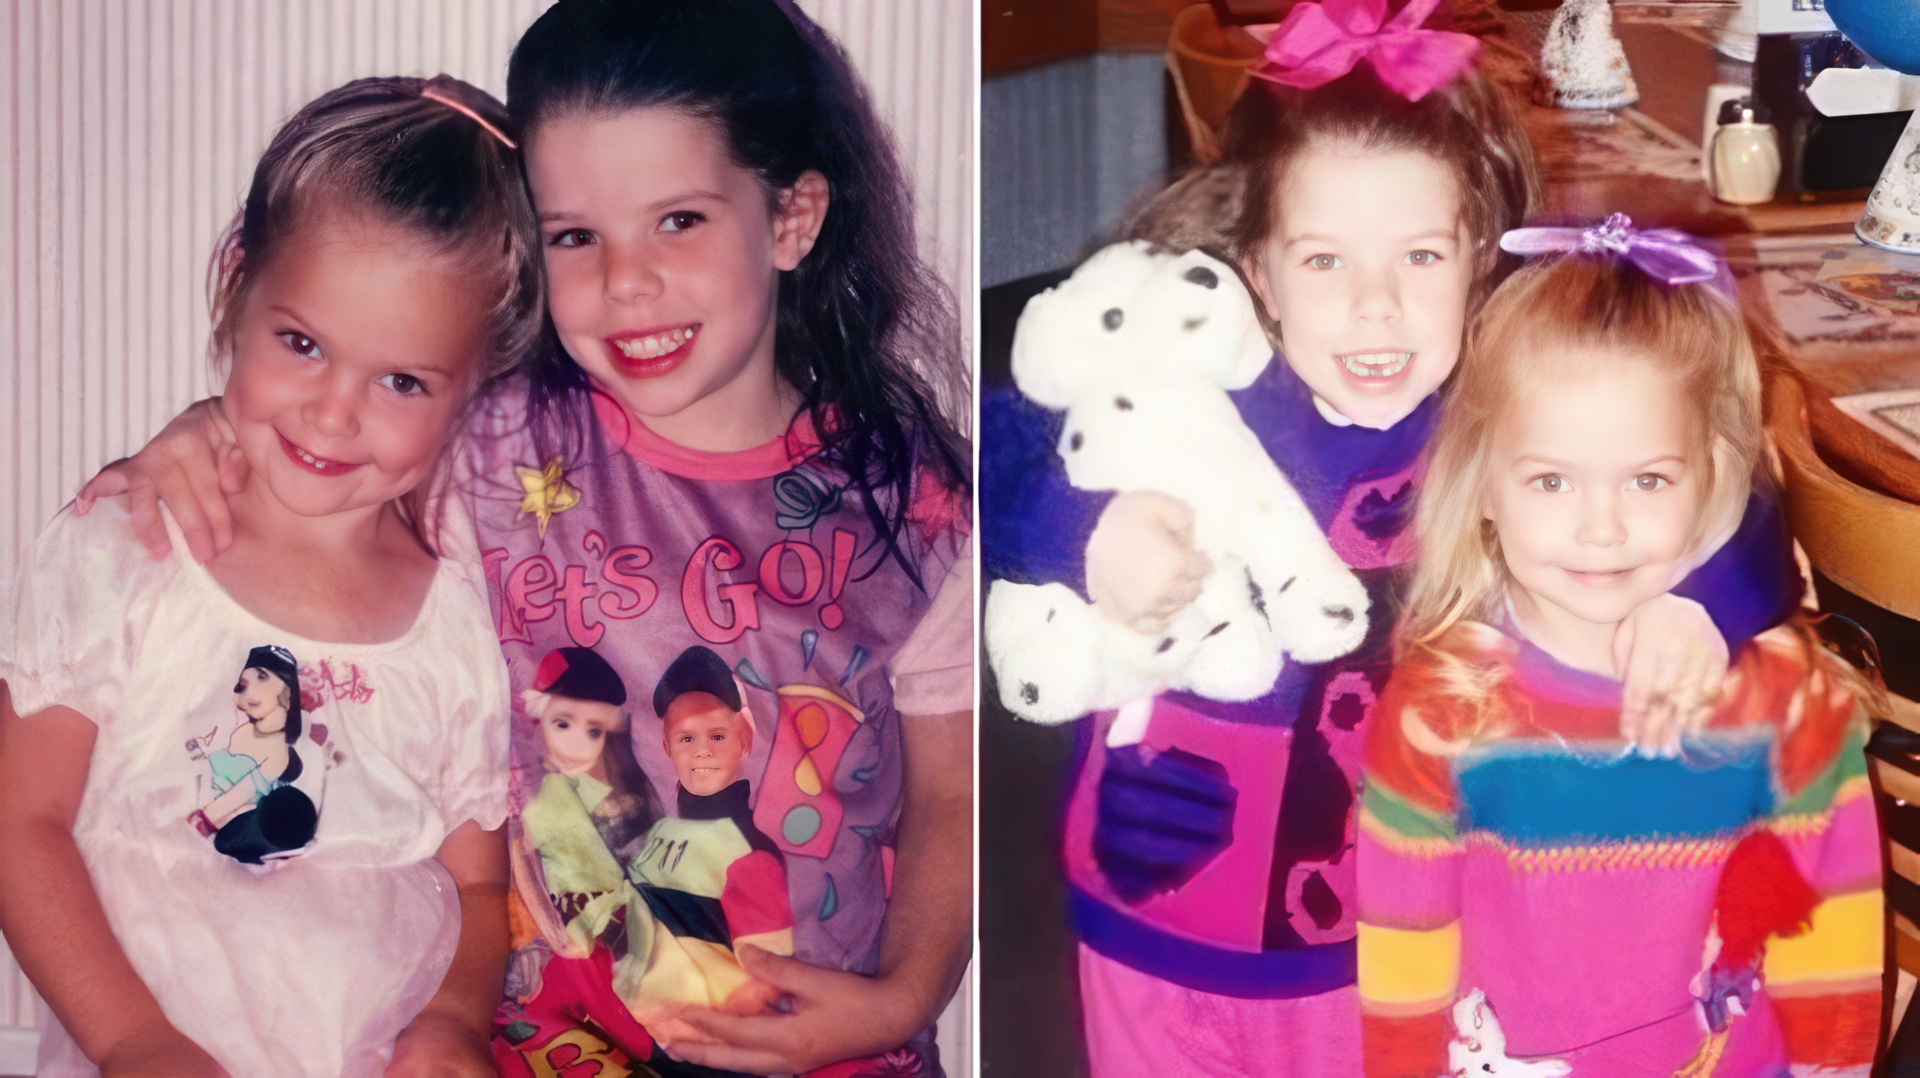 Ashley Benson and her sister as children